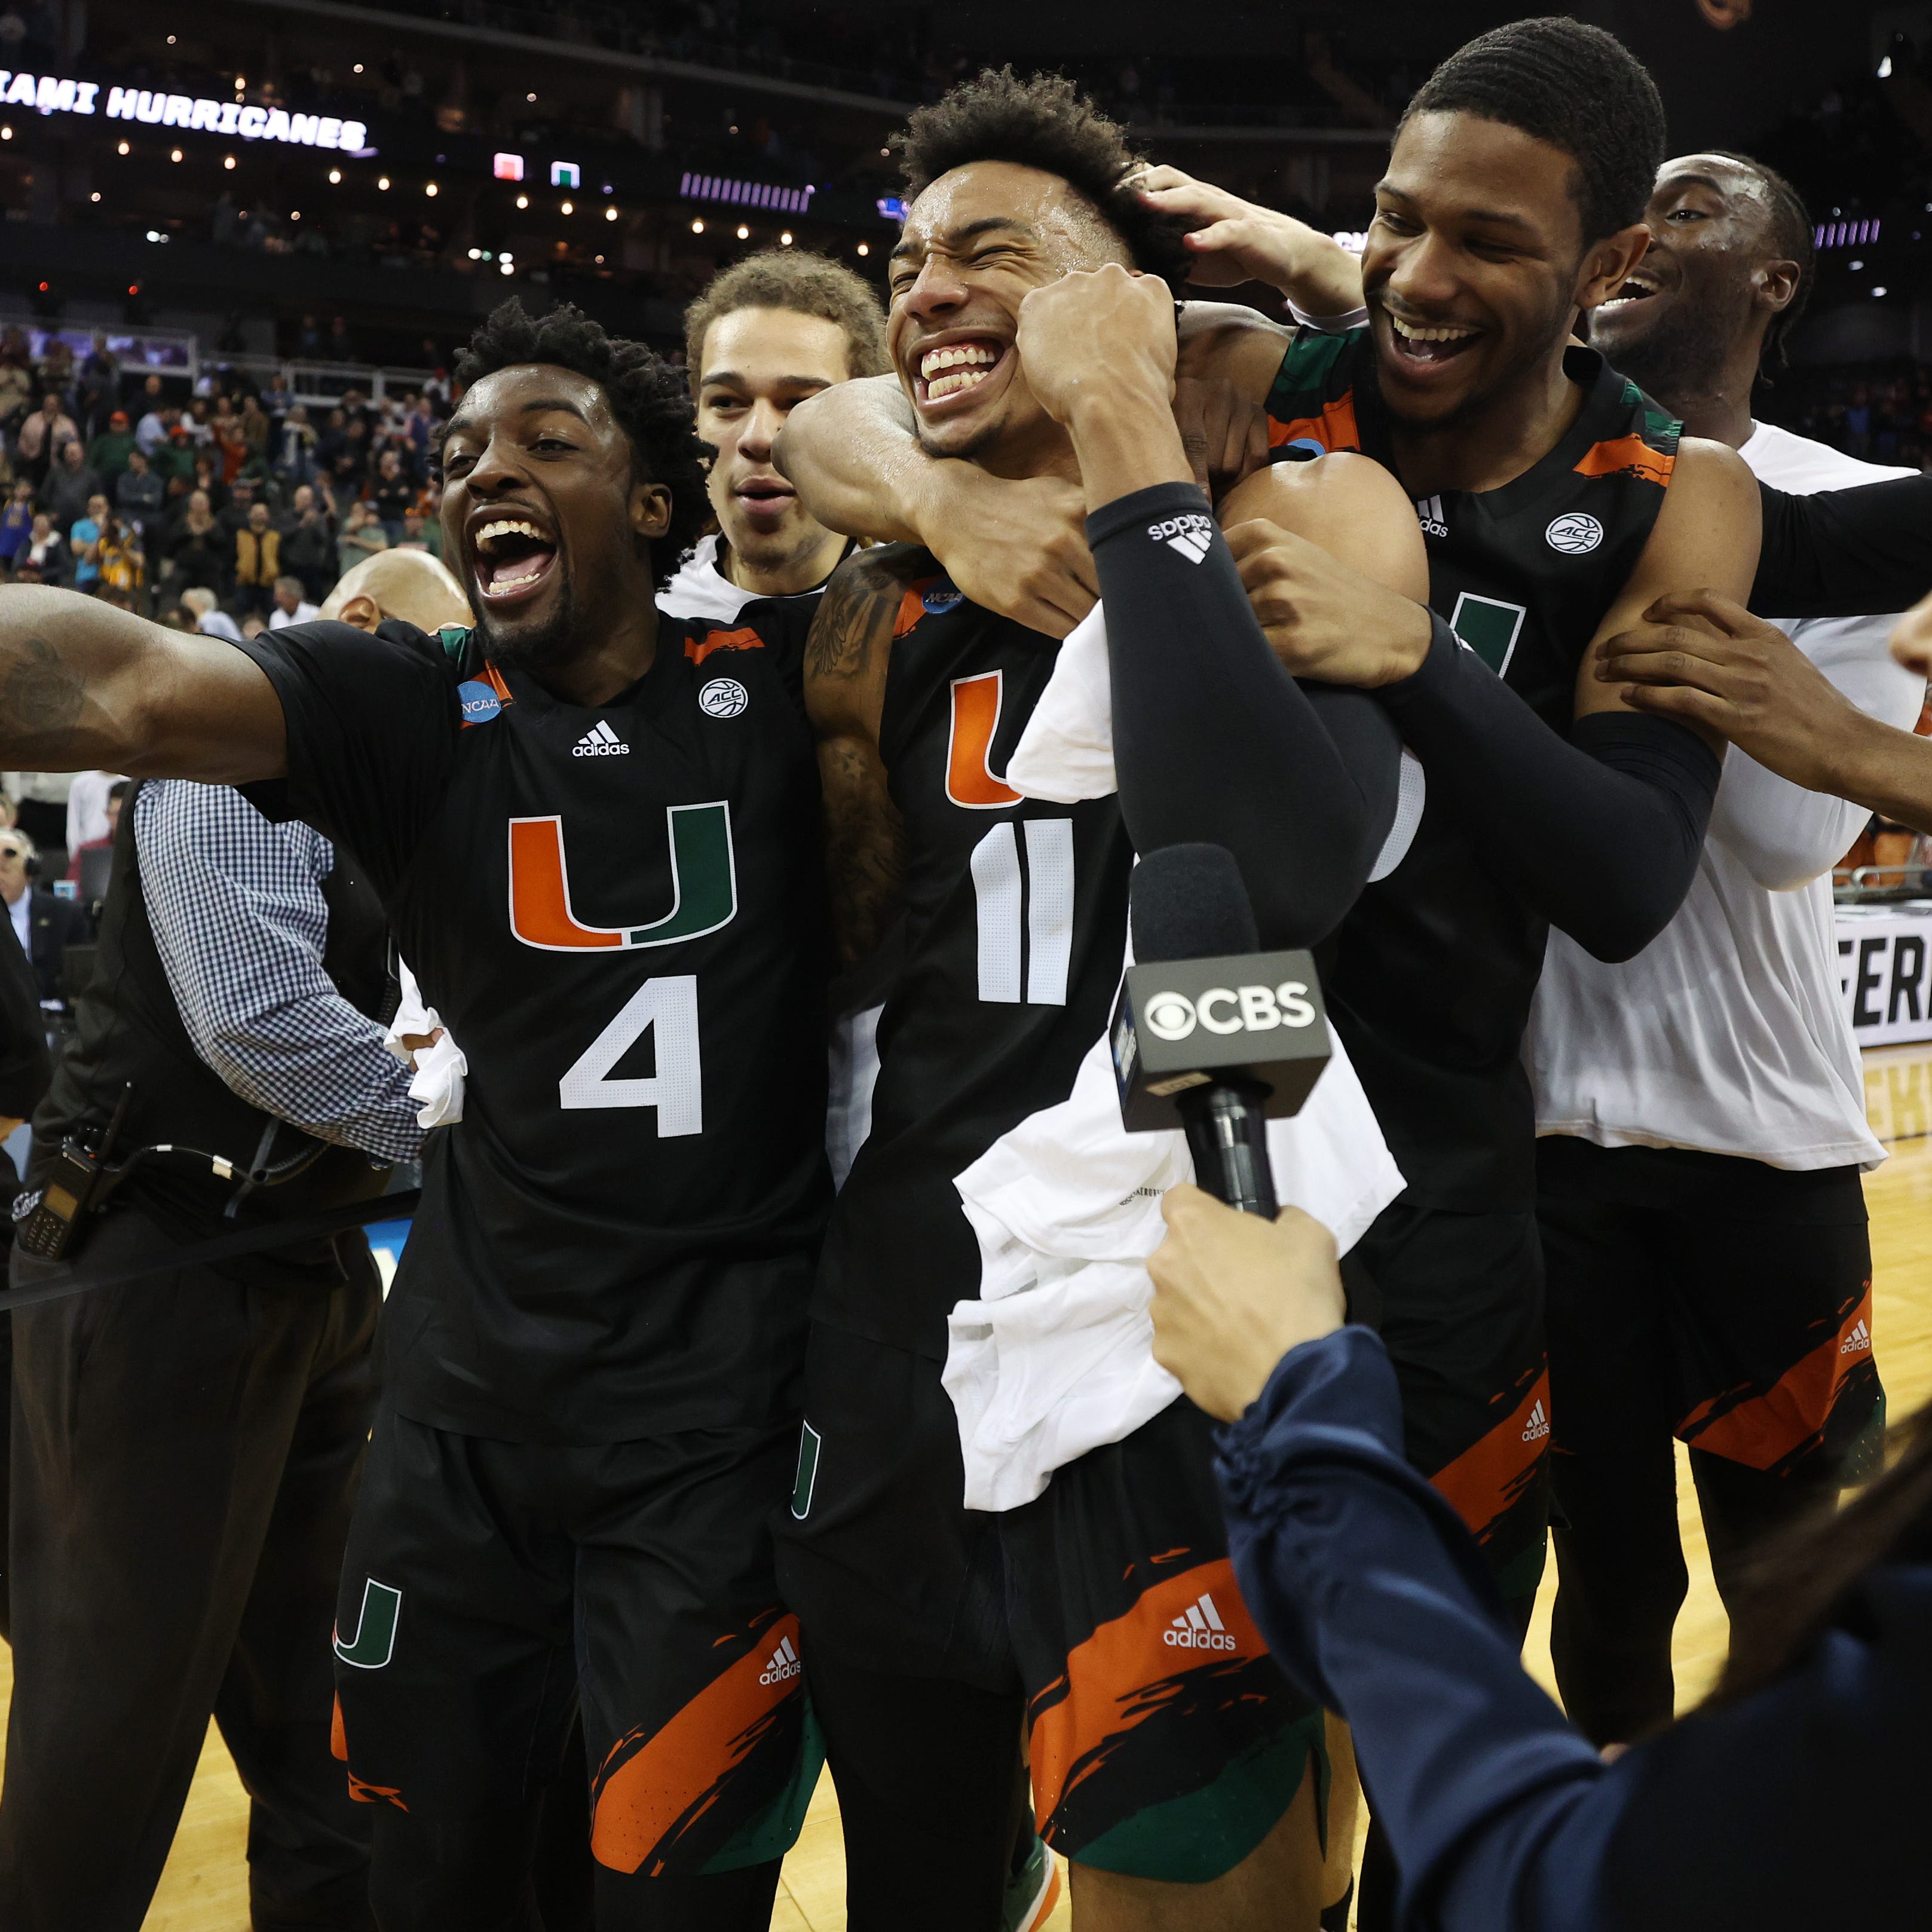 Miami (Fla.) players Bensley Joseph (4) and Jordan Miller (11) celebrate with teammates after defeating Texas in the Midwest Regional championship game of the NCAA men's tournament at T-Mobile Center.